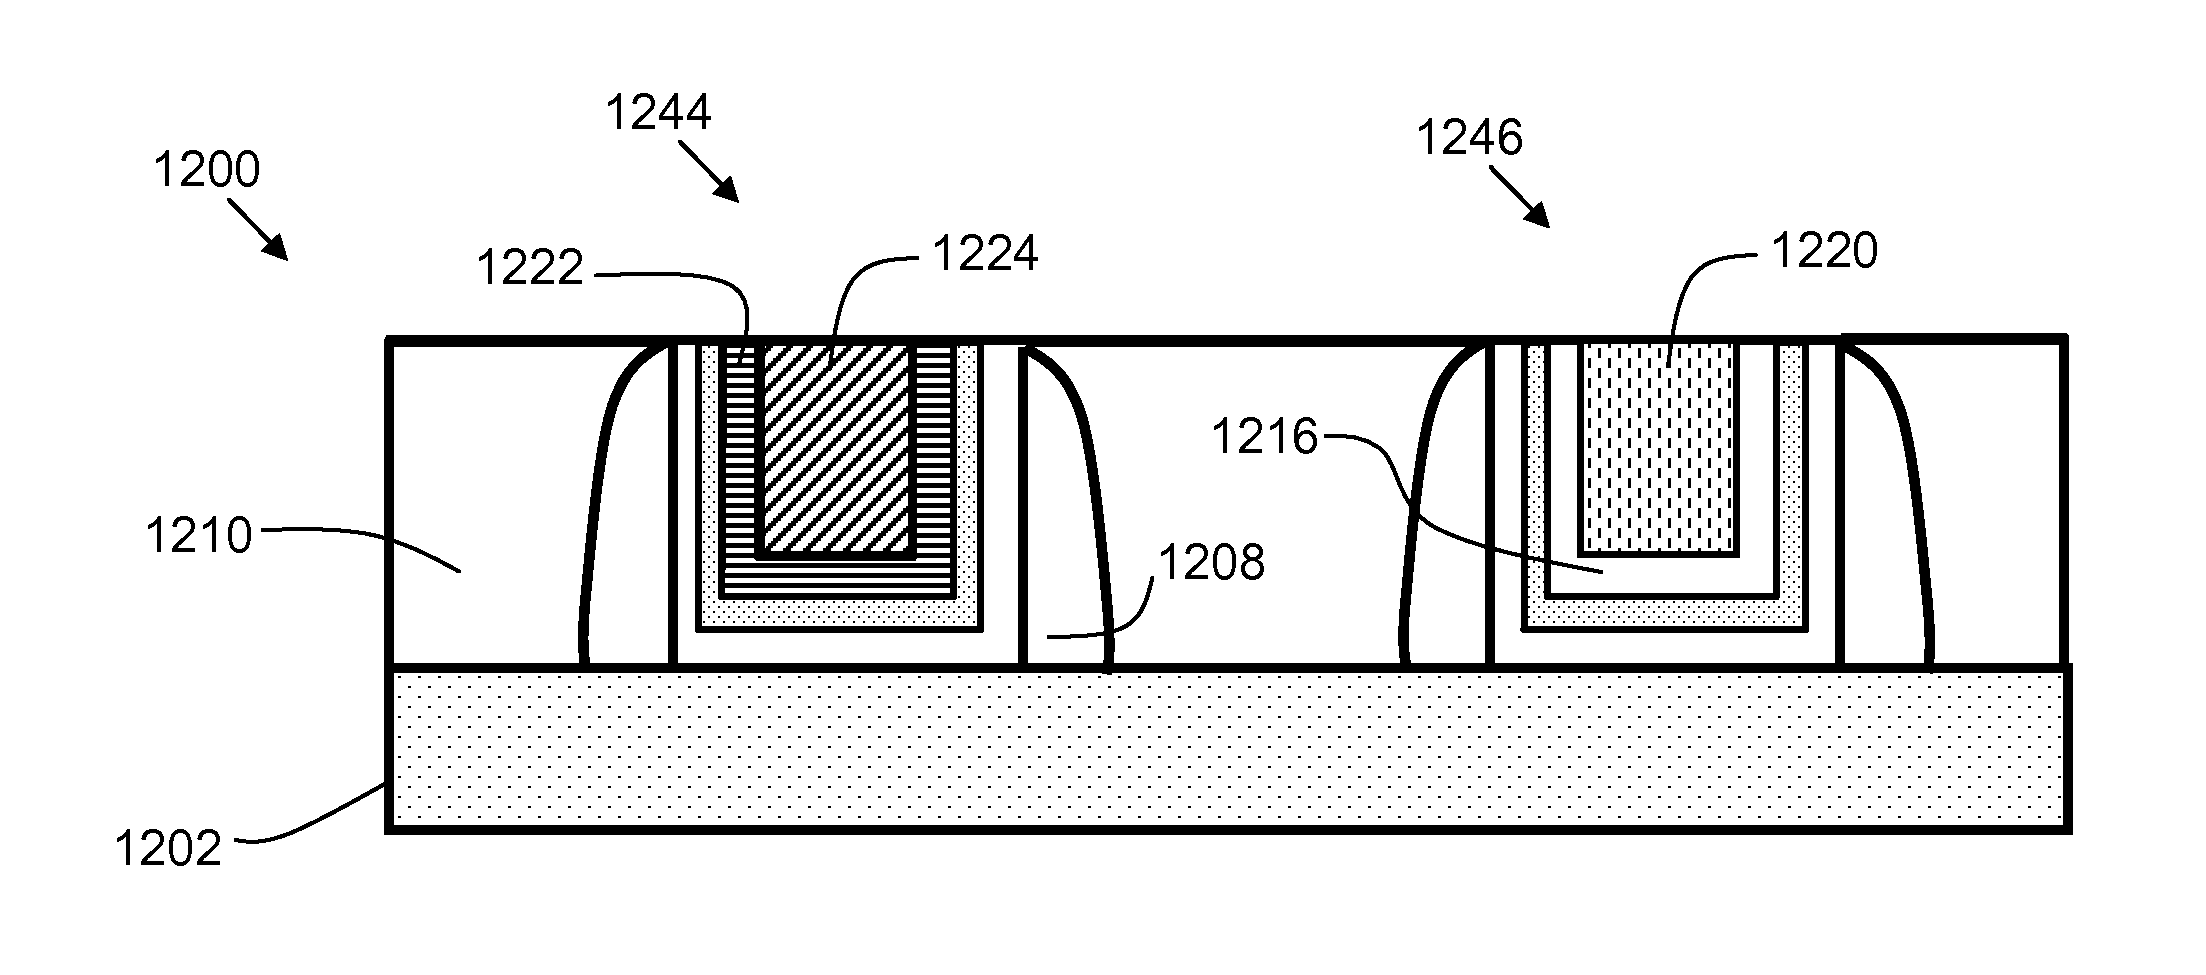 Dual metal fill and dual threshold voltage for replacement gate metal devices